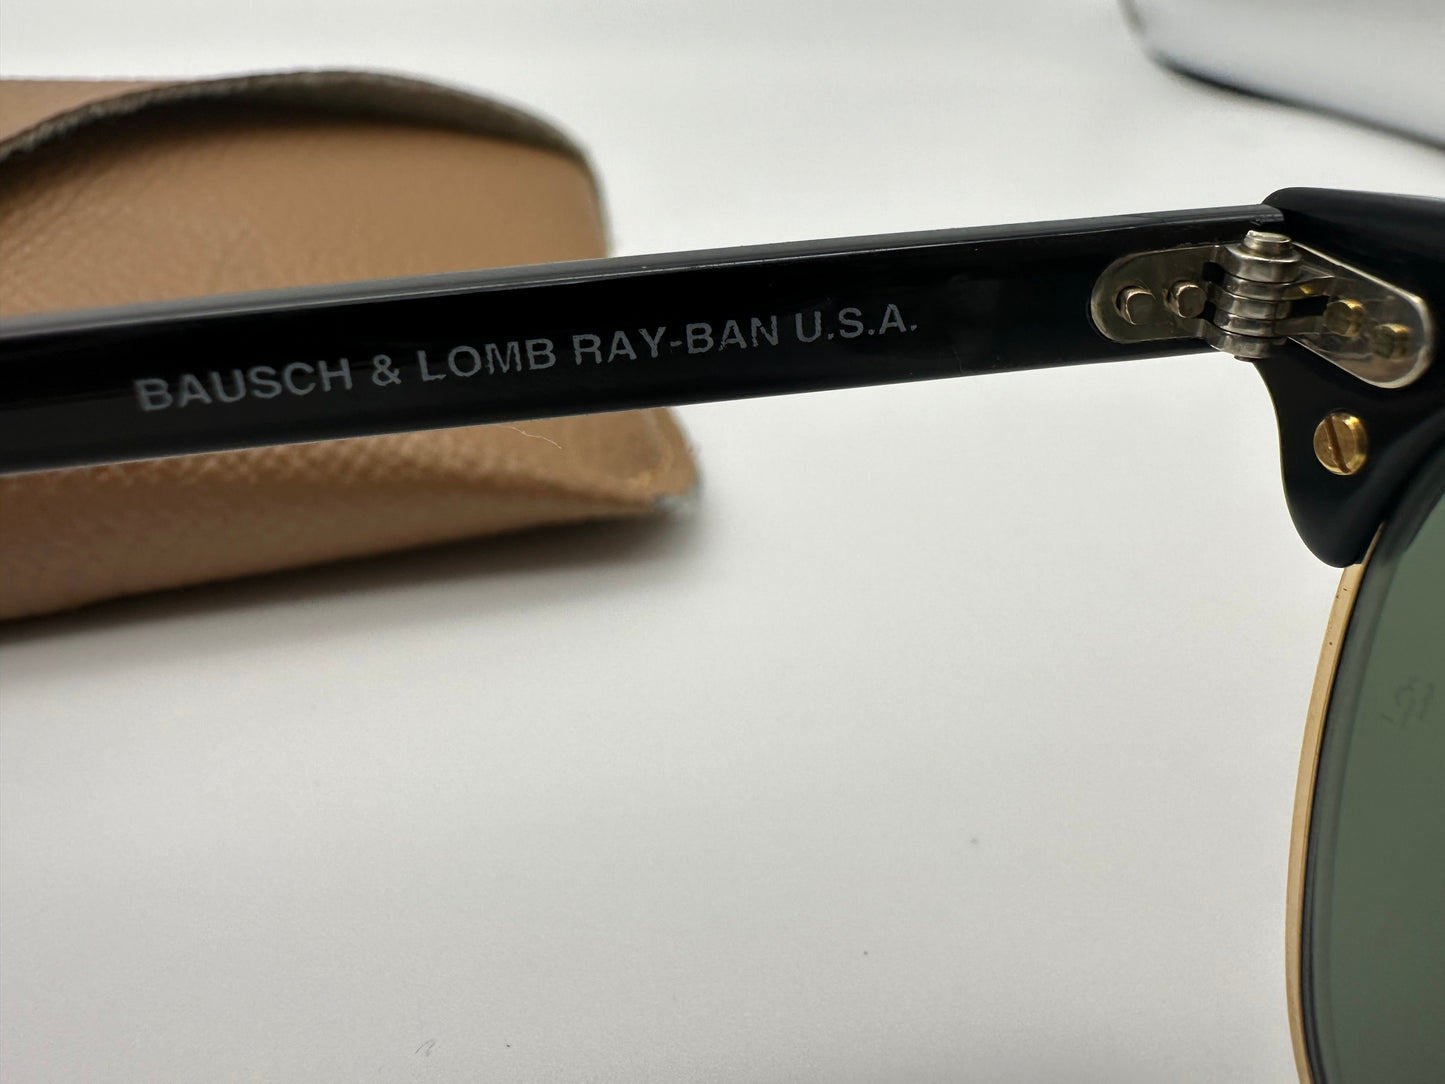 RAY-BAN USA BAUSCH & LOMB Clubmaster 51mm Black Gold G-15 W0366 new old stock